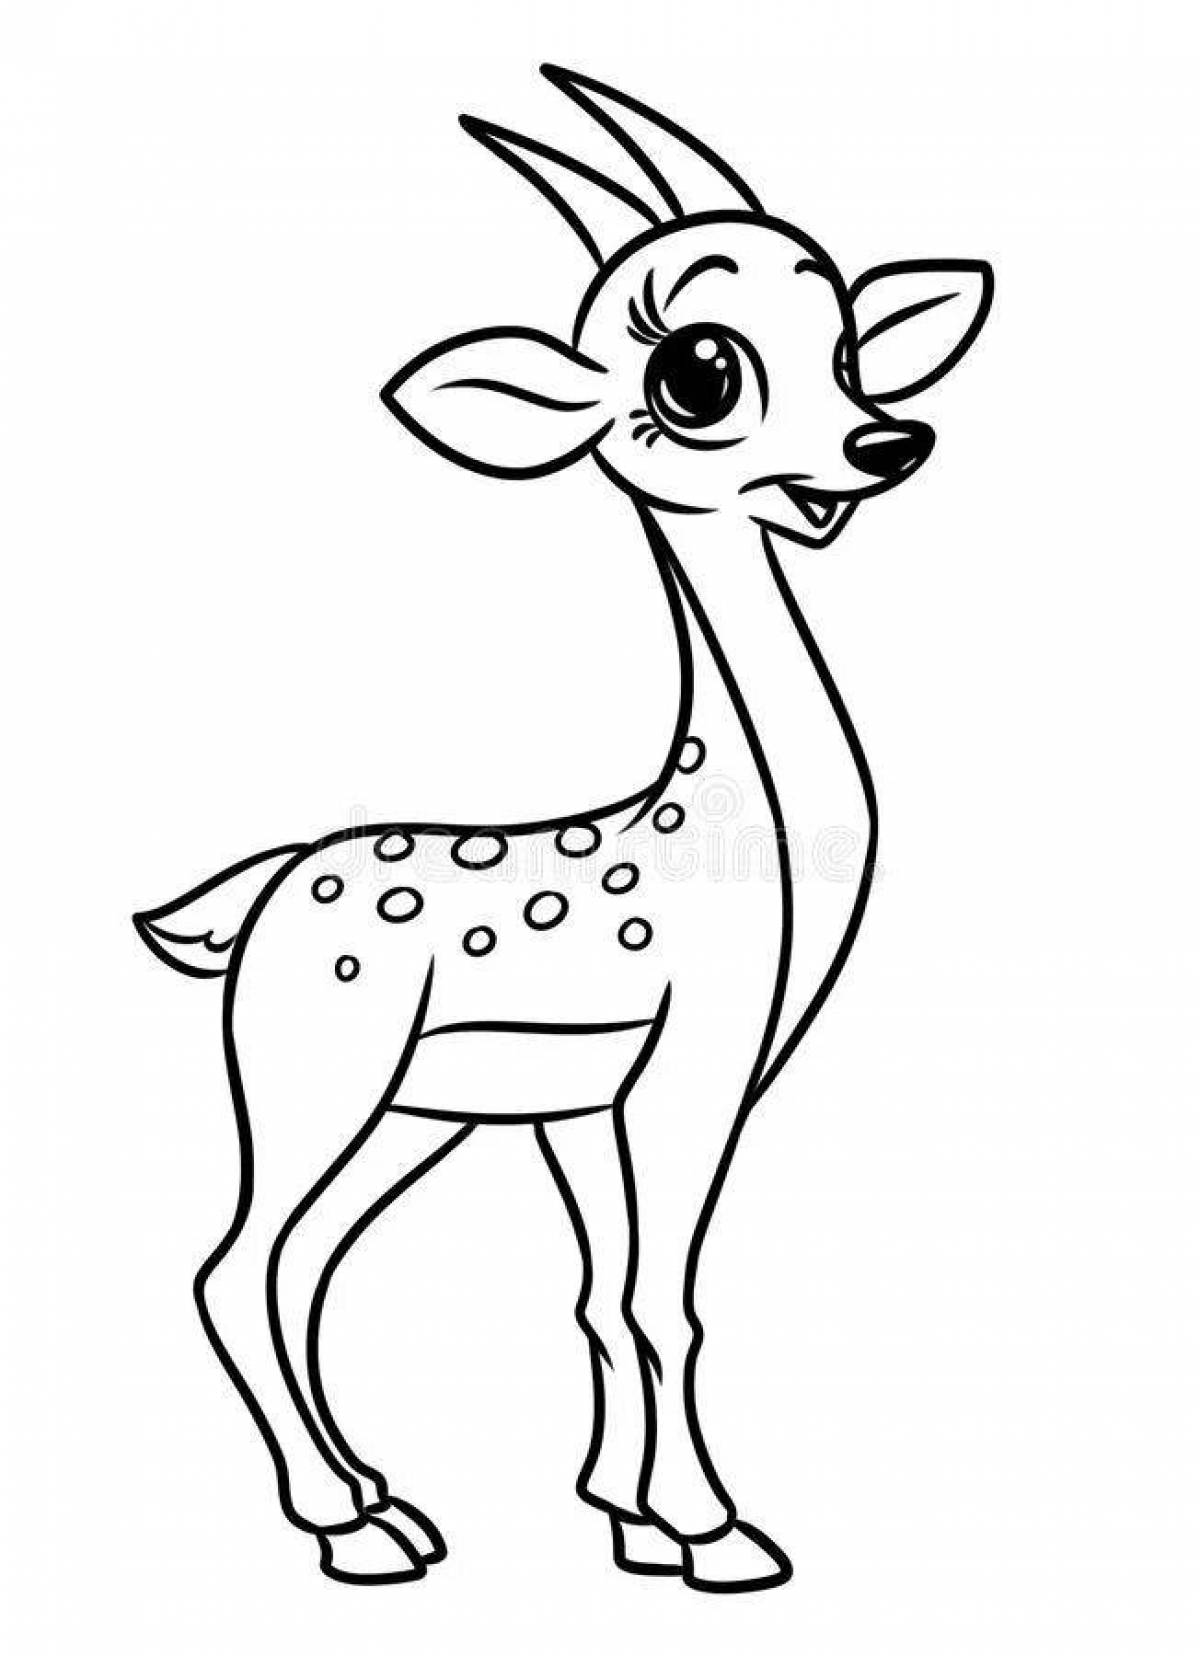 Glowing golden antelope coloring page